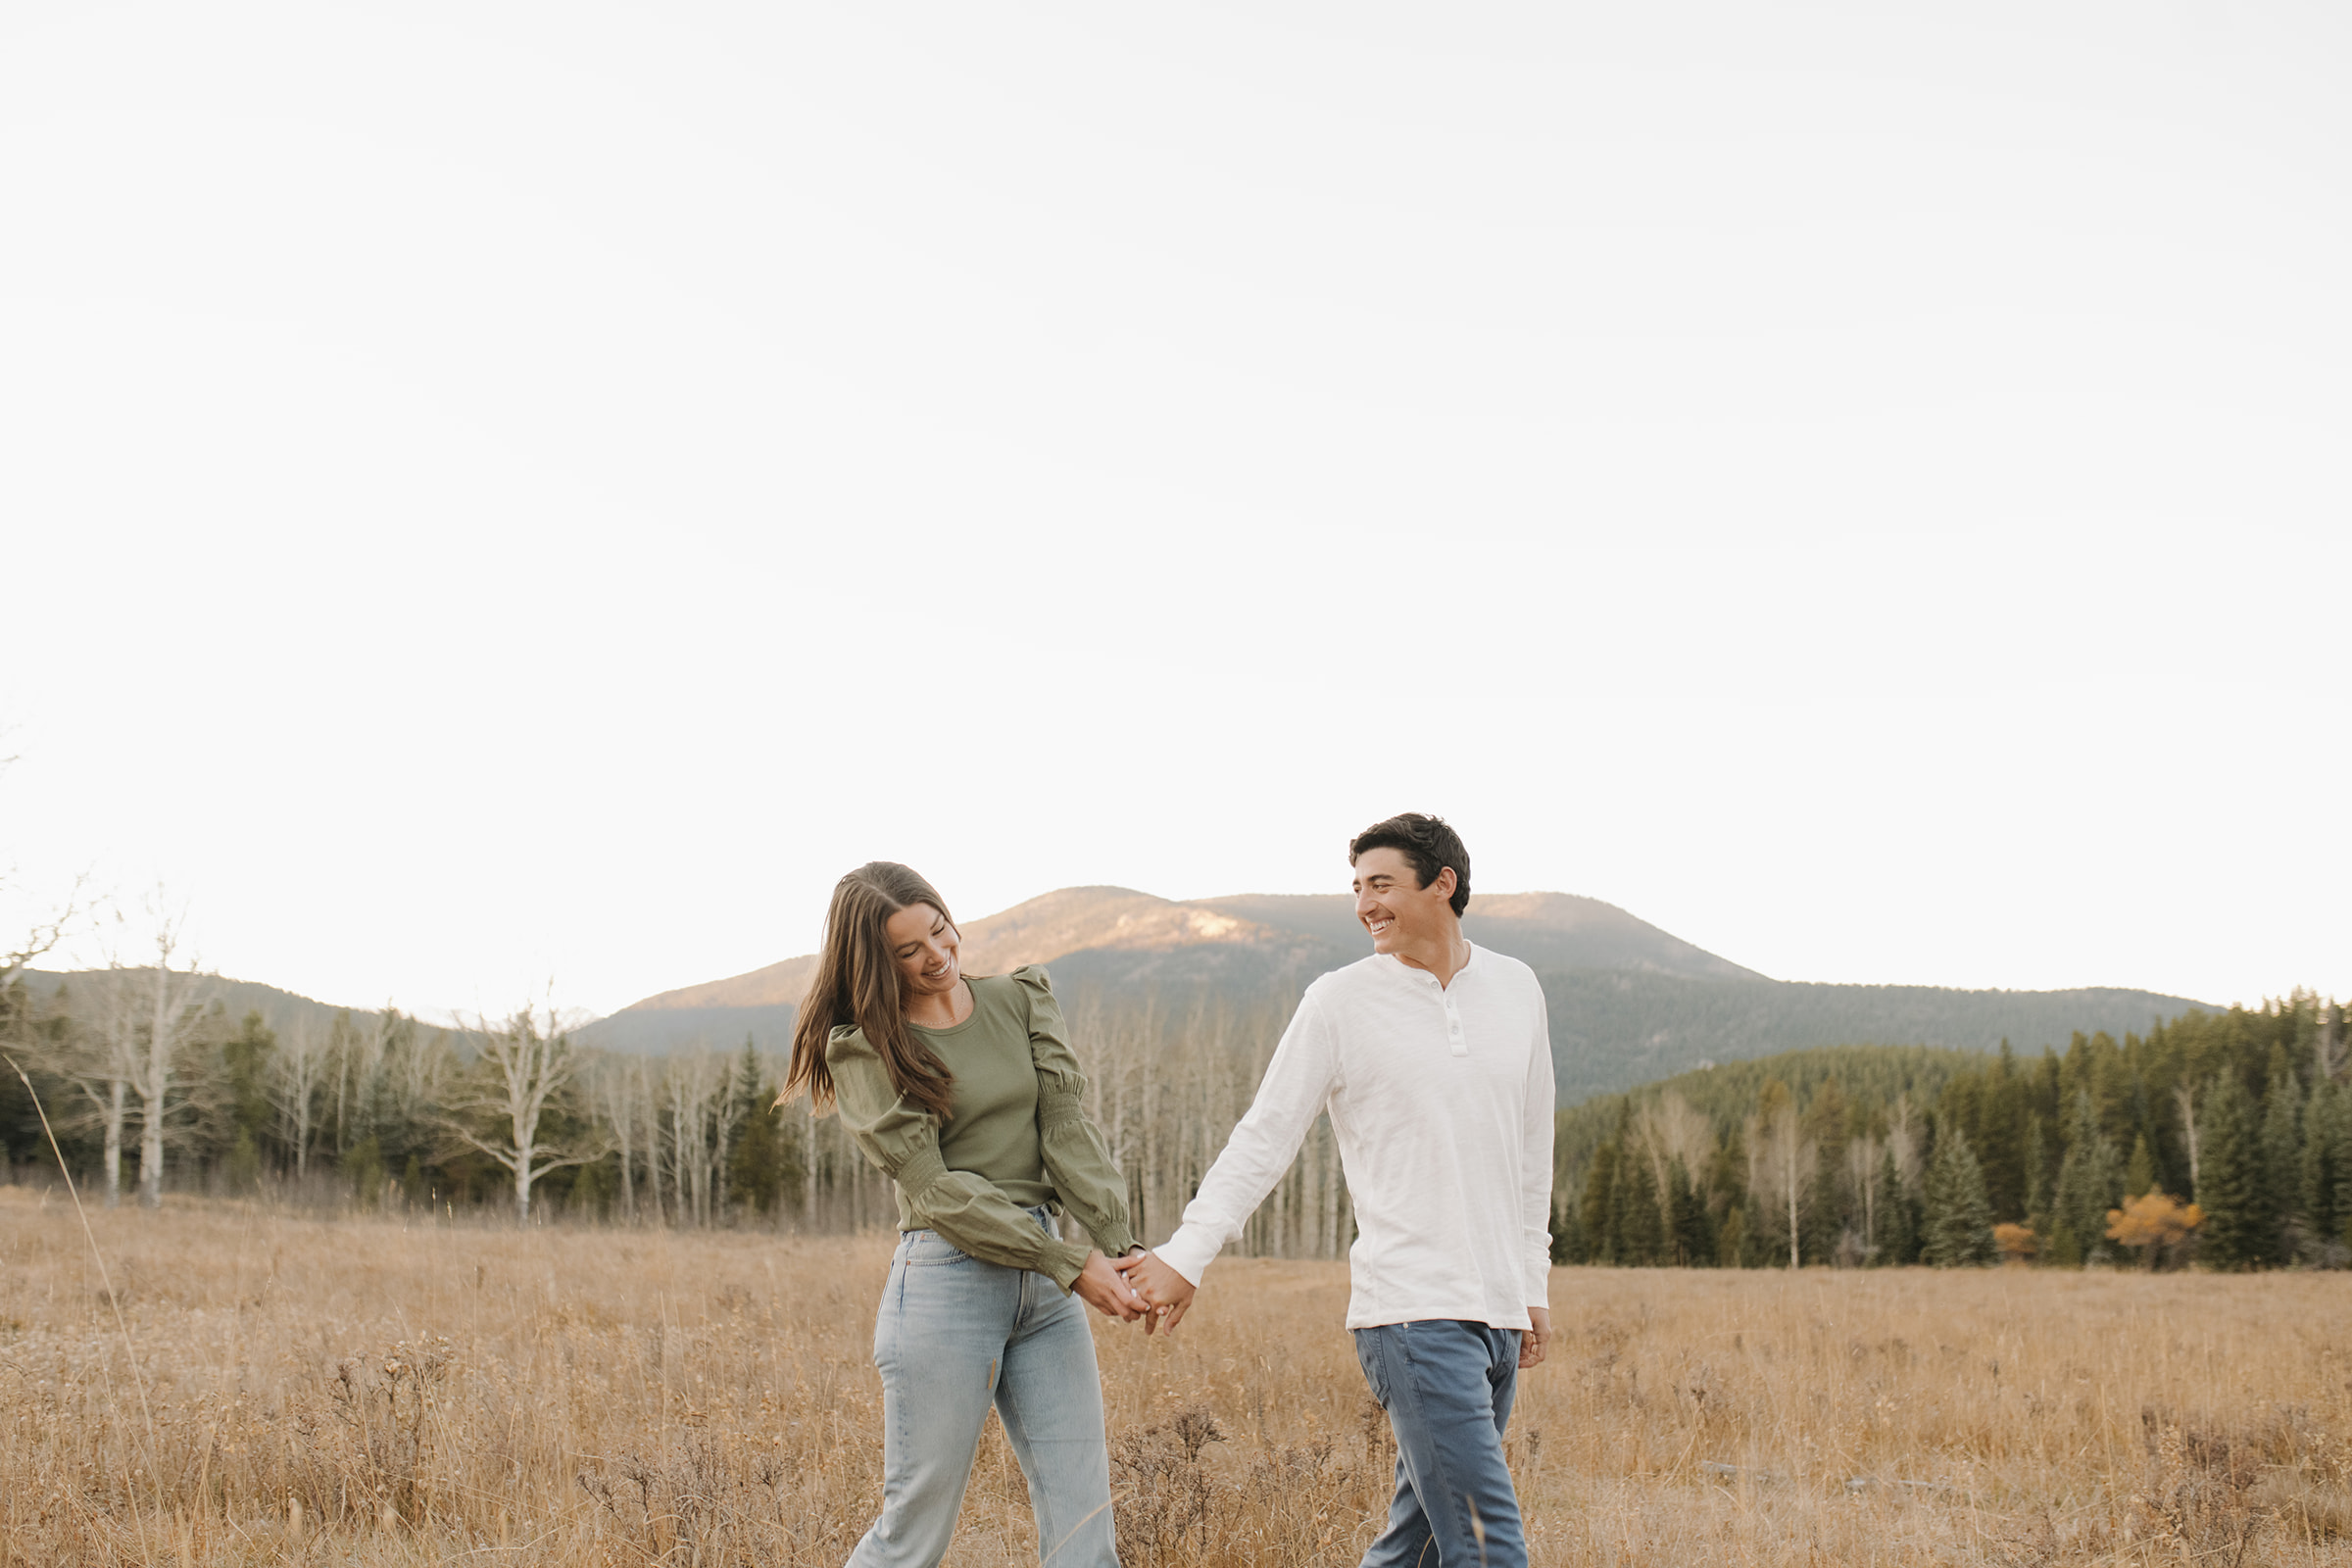 Couples engagement session in Evergreen, Colorado mountains